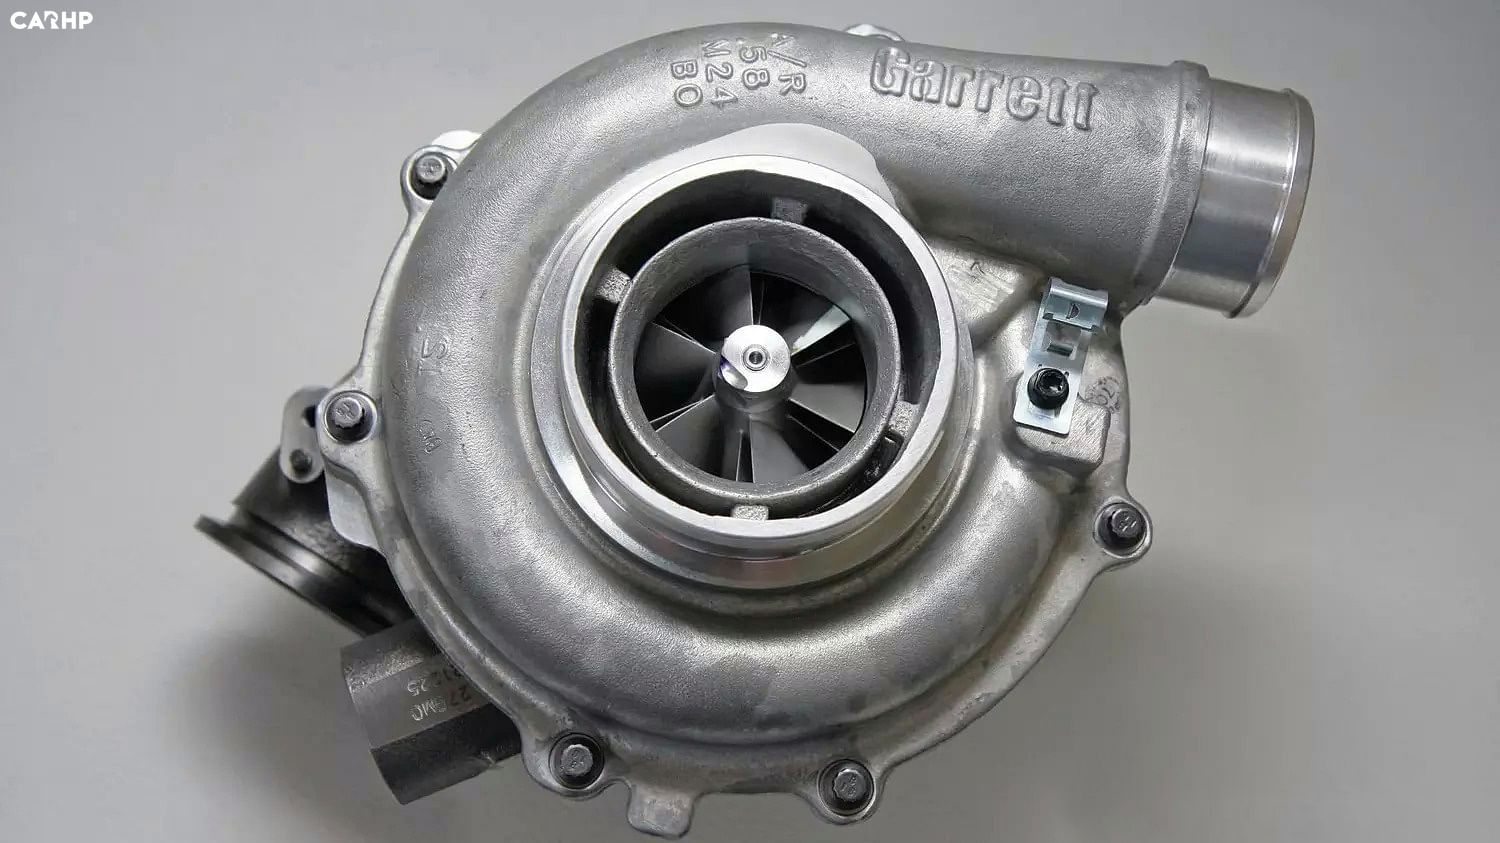 Let Us Understand The Concept and Types Of Turbochargers